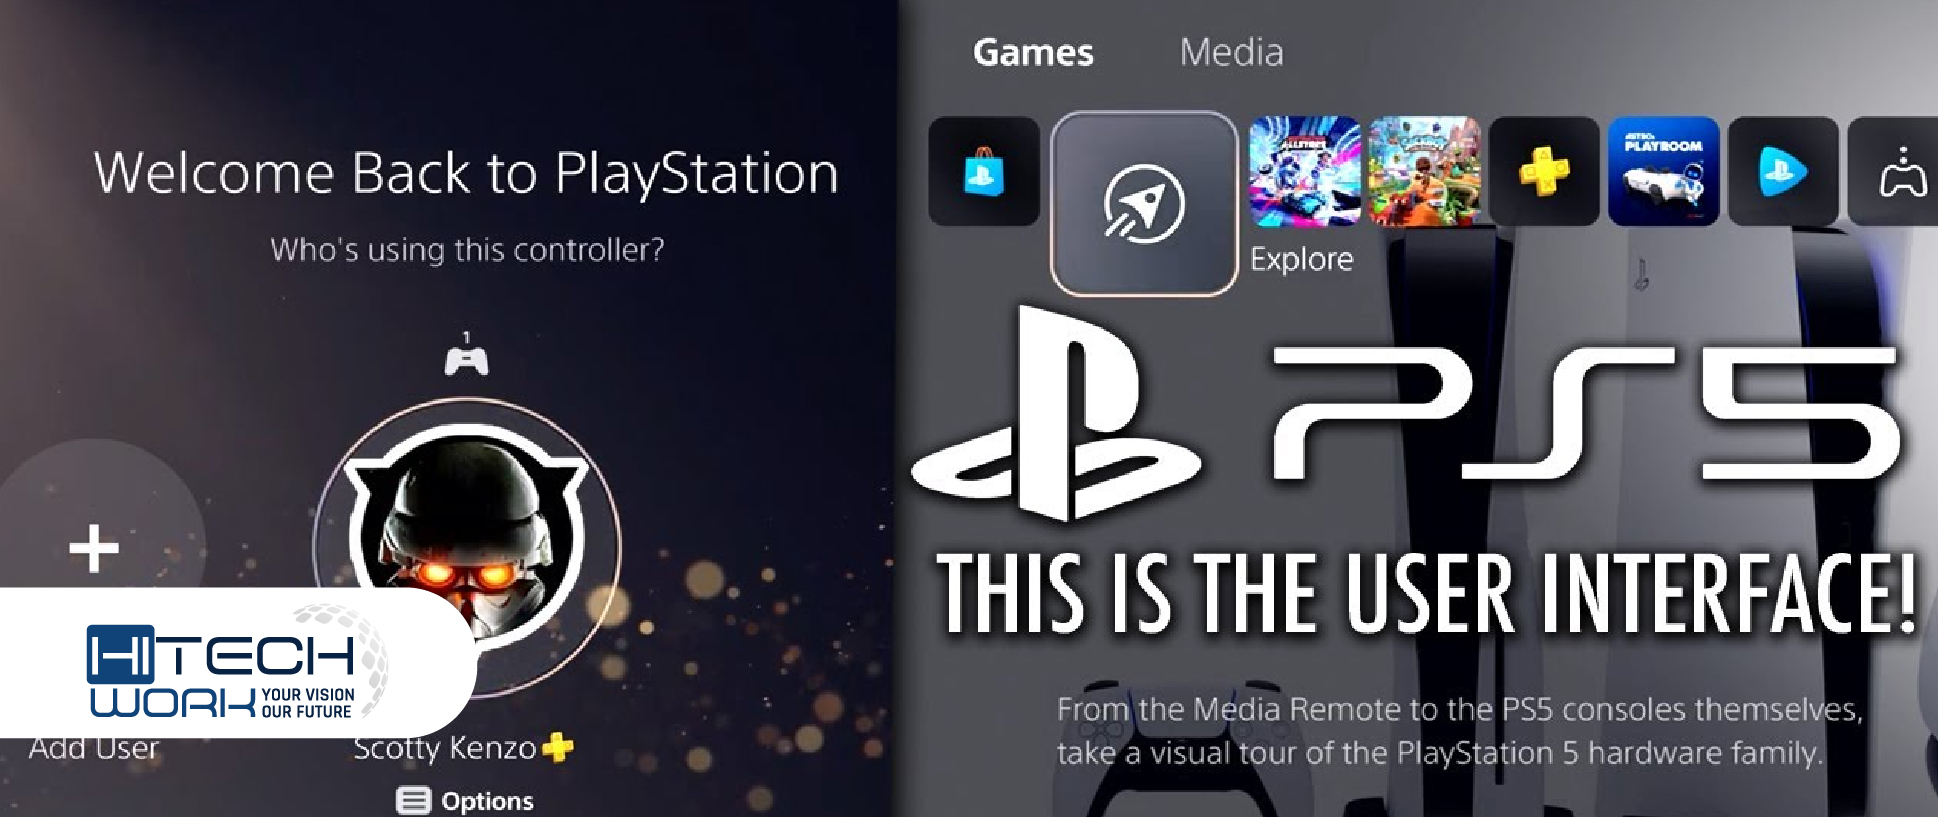 New PlayStation 5 User Interface